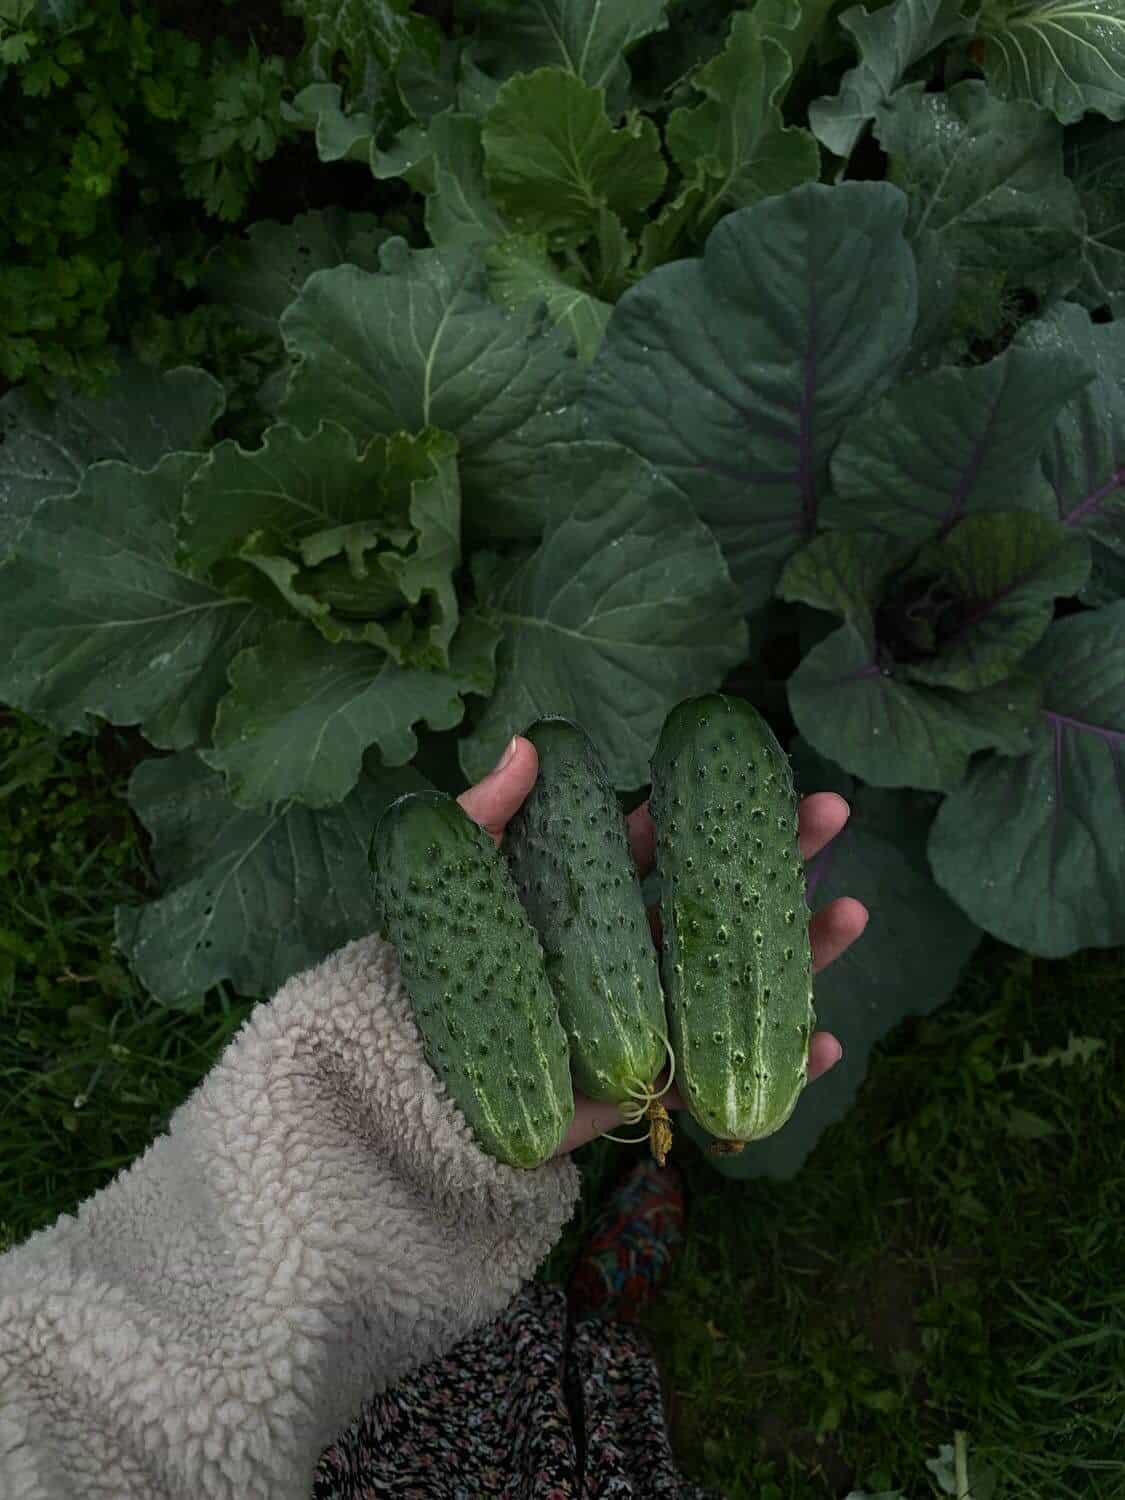 Hand holding harvested cucumber